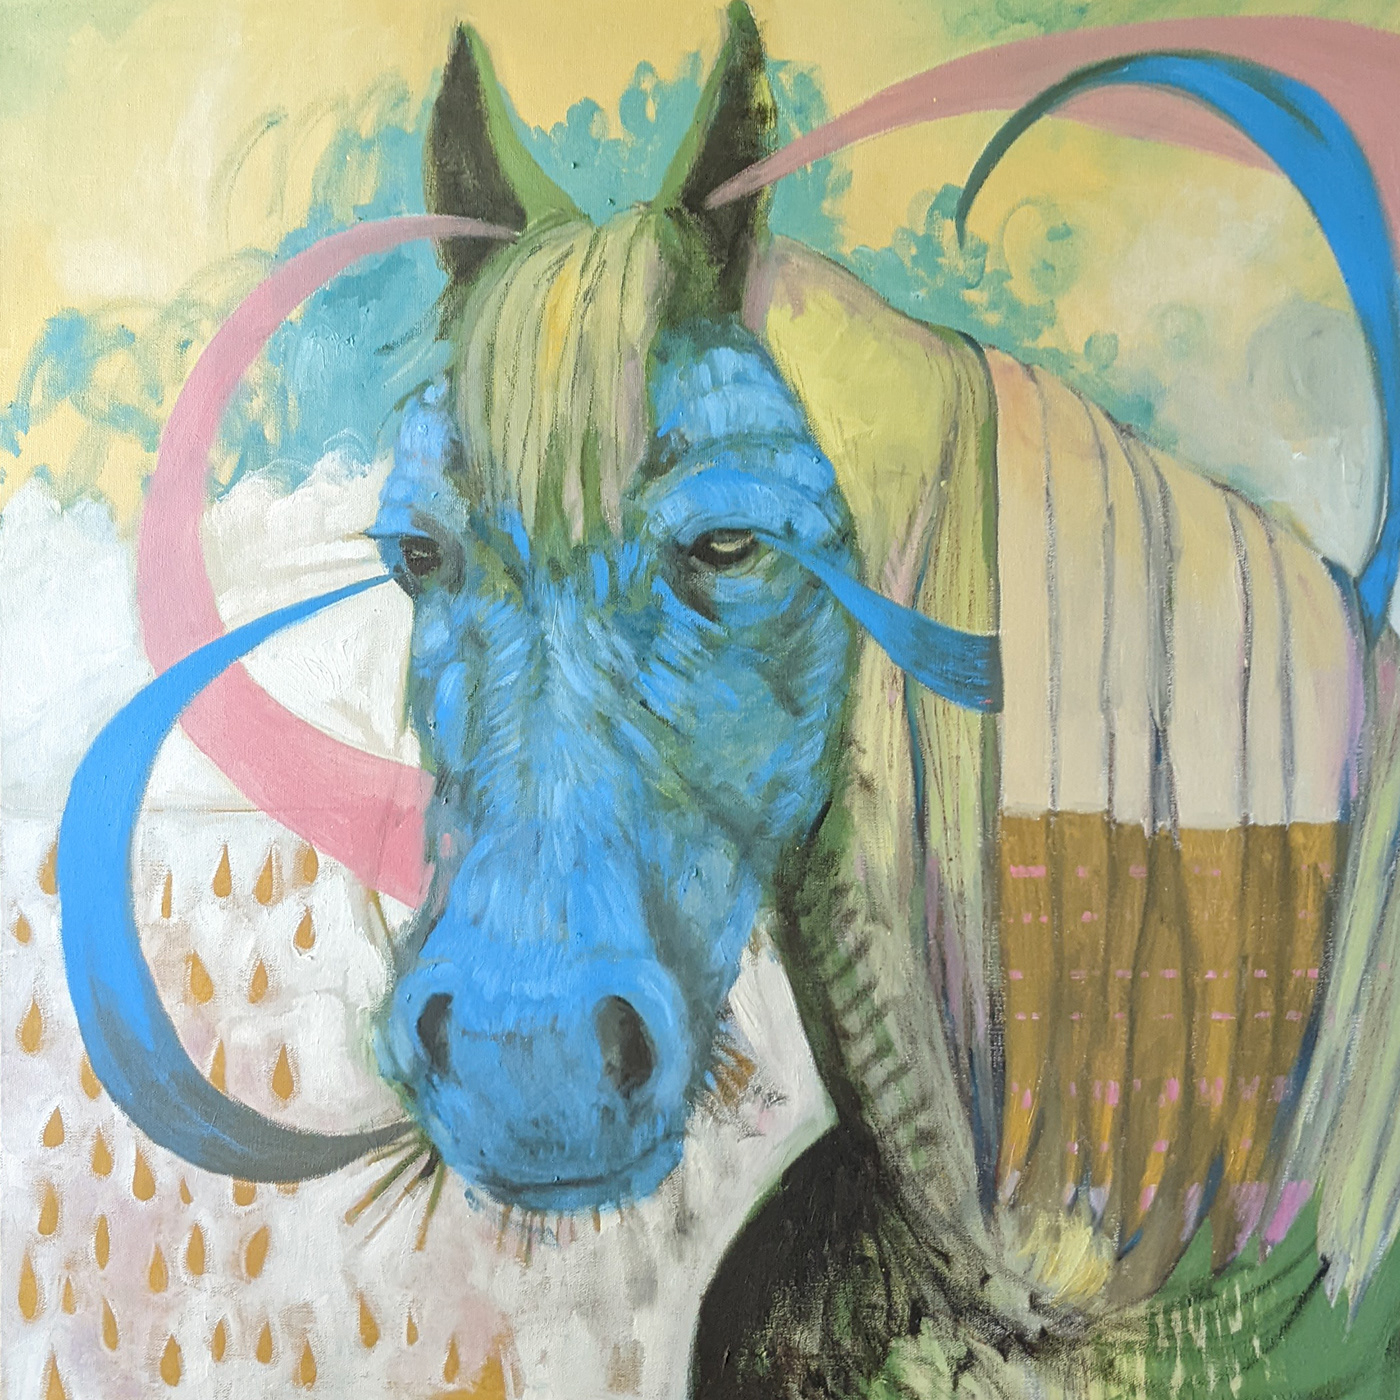 A blue horse exhales energy waves against a backdrop of tears.